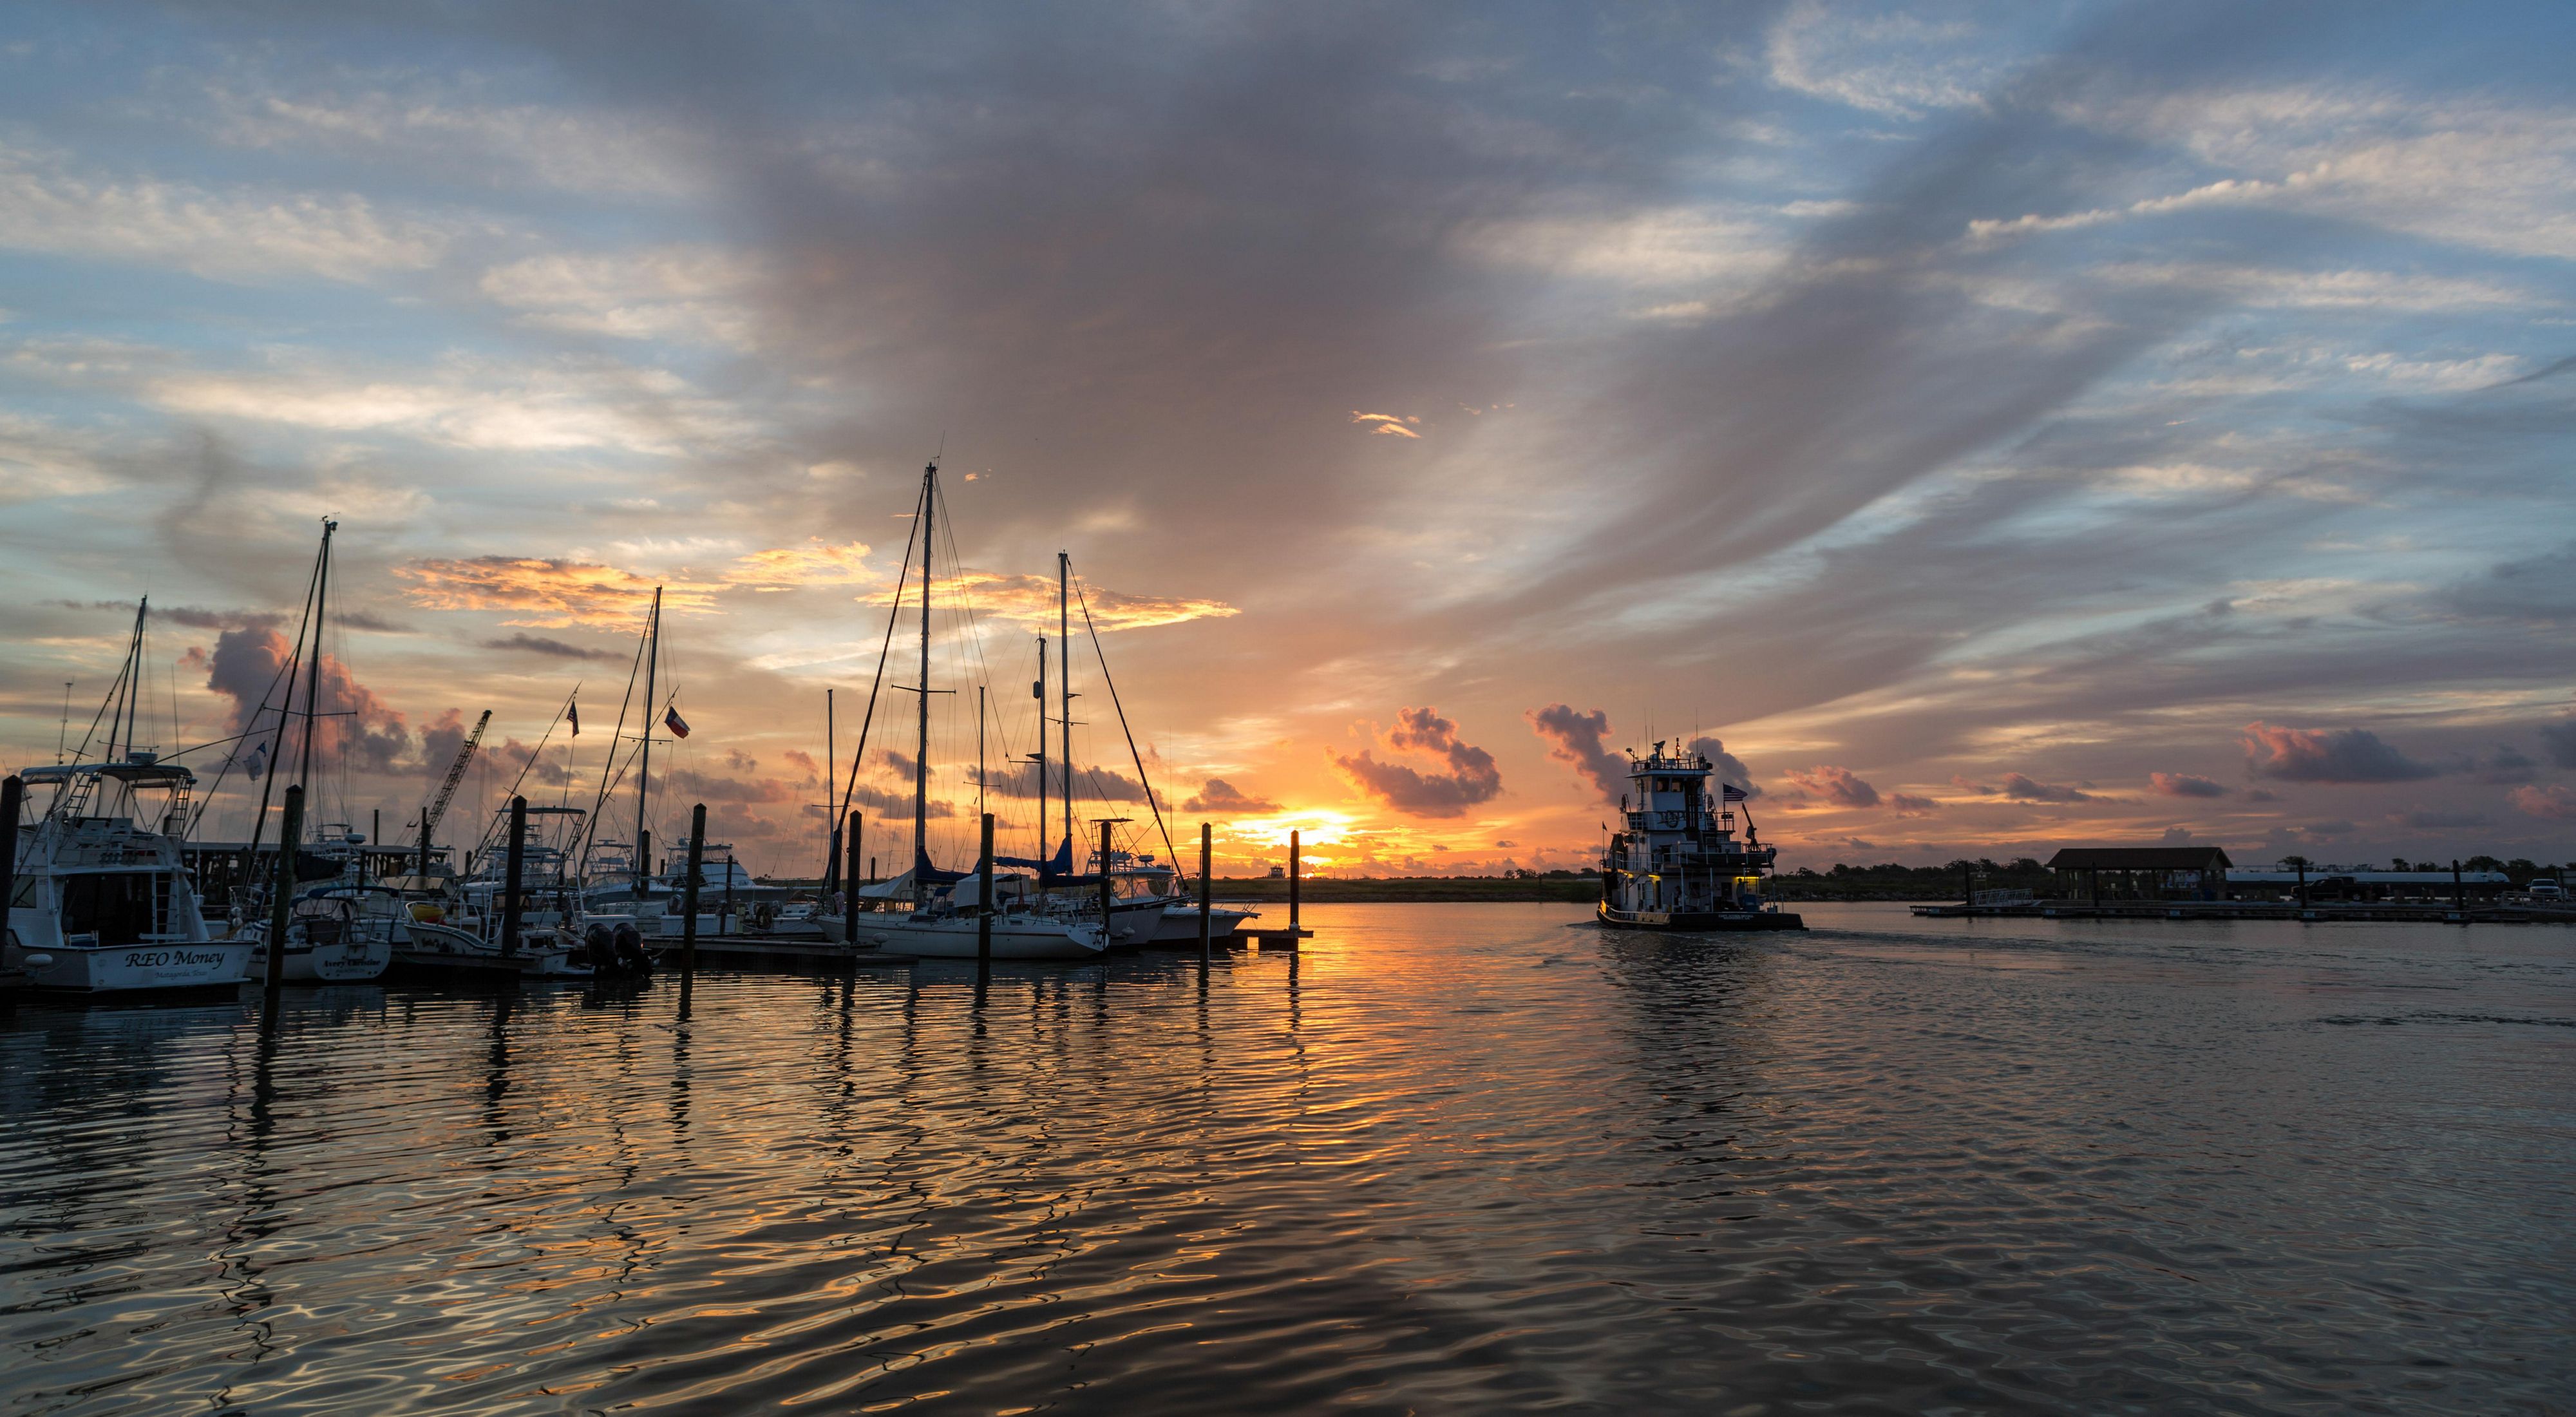 A marina full of sailboats with an orange and pink sunset behind it in a cloud-streaked sky.